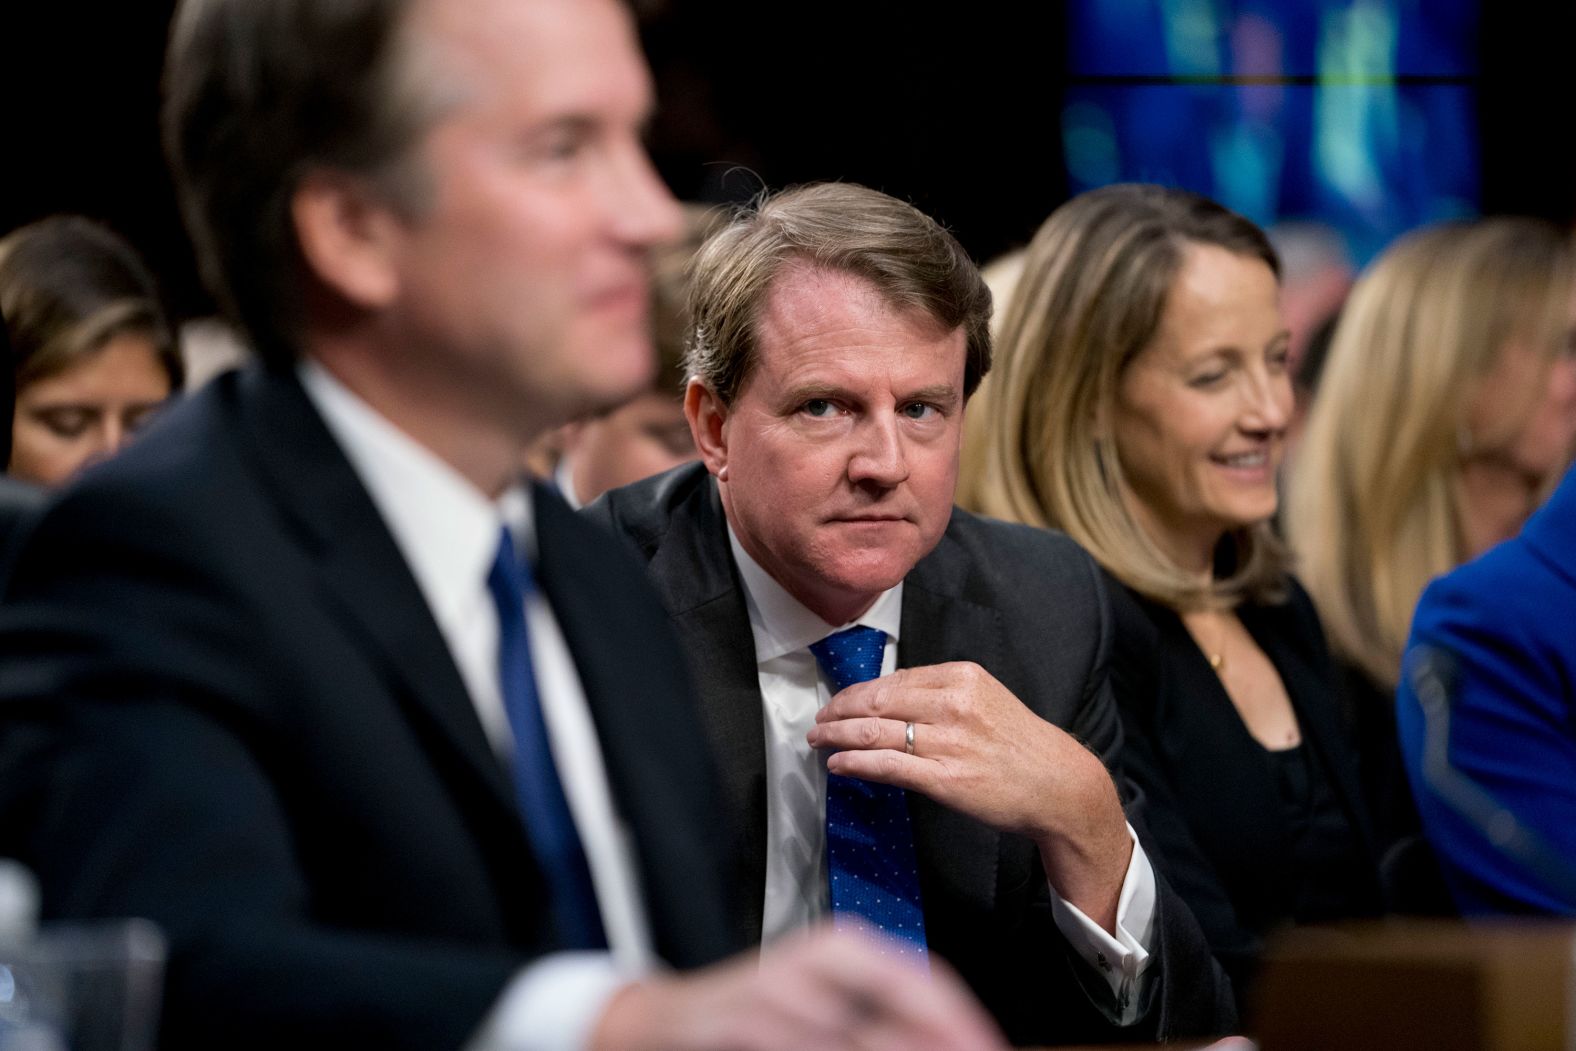 White House counsel Don McGahn looks at Kavanaugh during Tuesday's hearing.